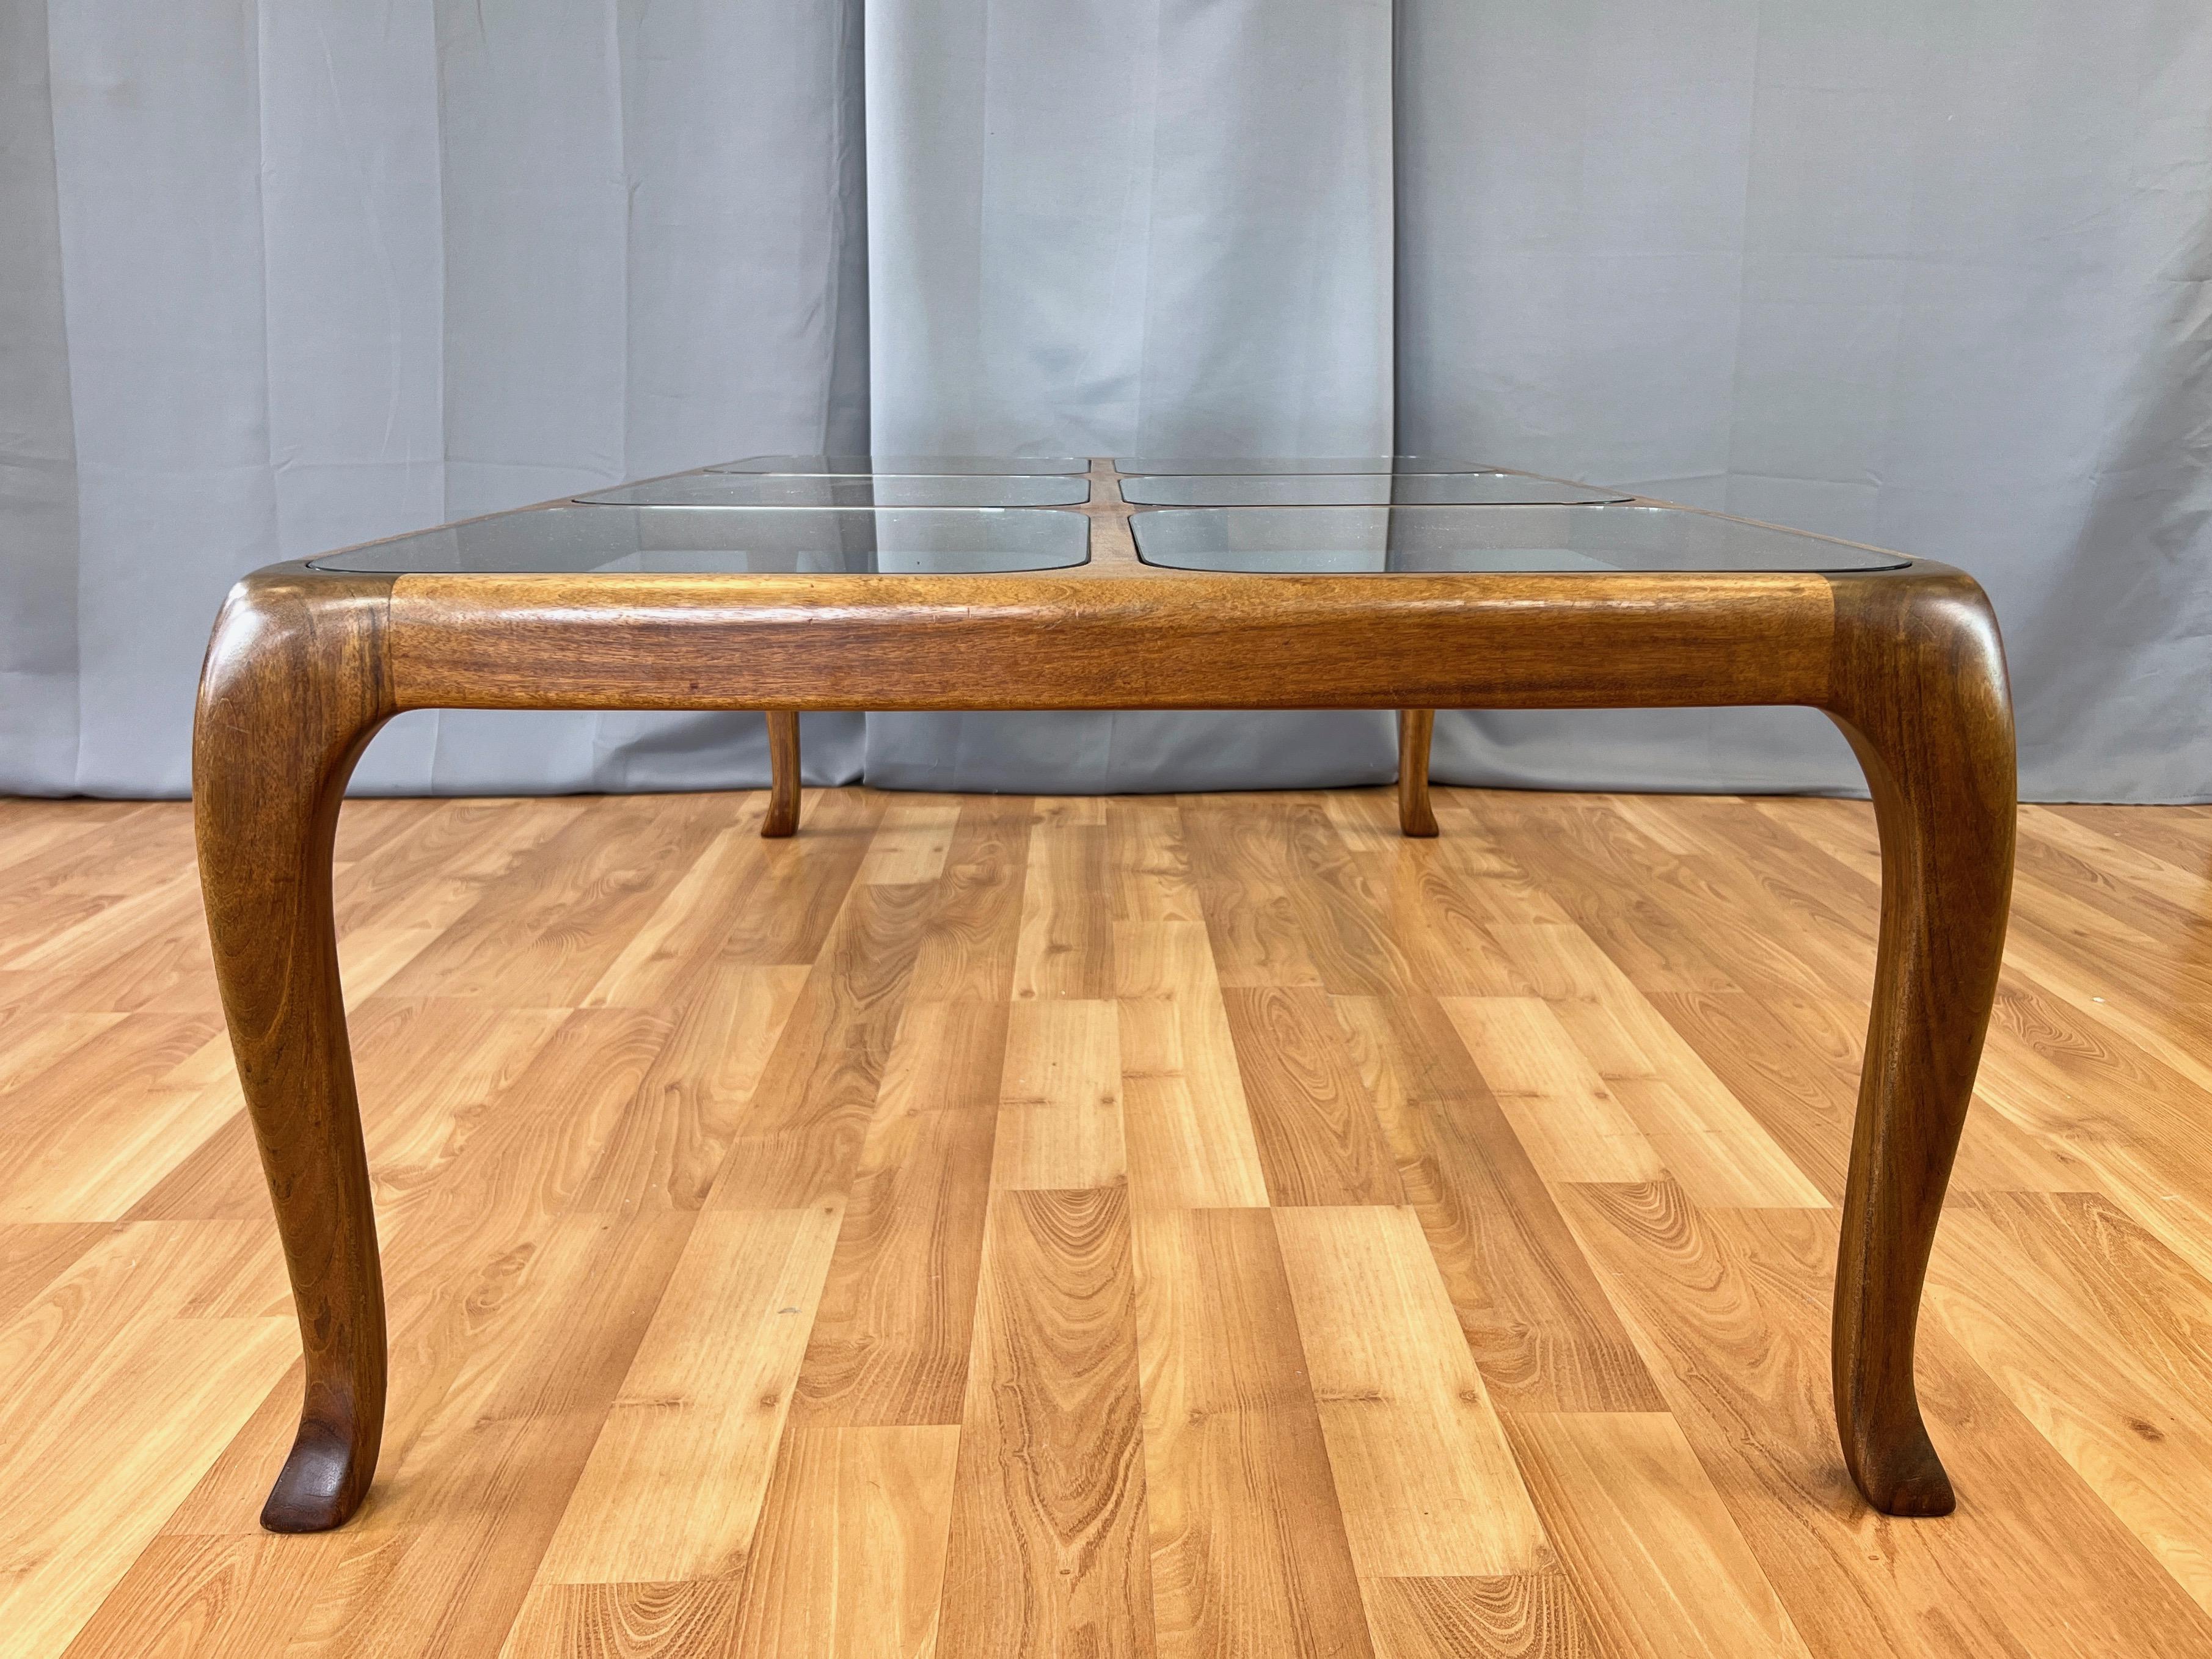 Thomas Saydah Large Walnut and Glass Coffee Table, Signed and Dated, 1982 For Sale 3